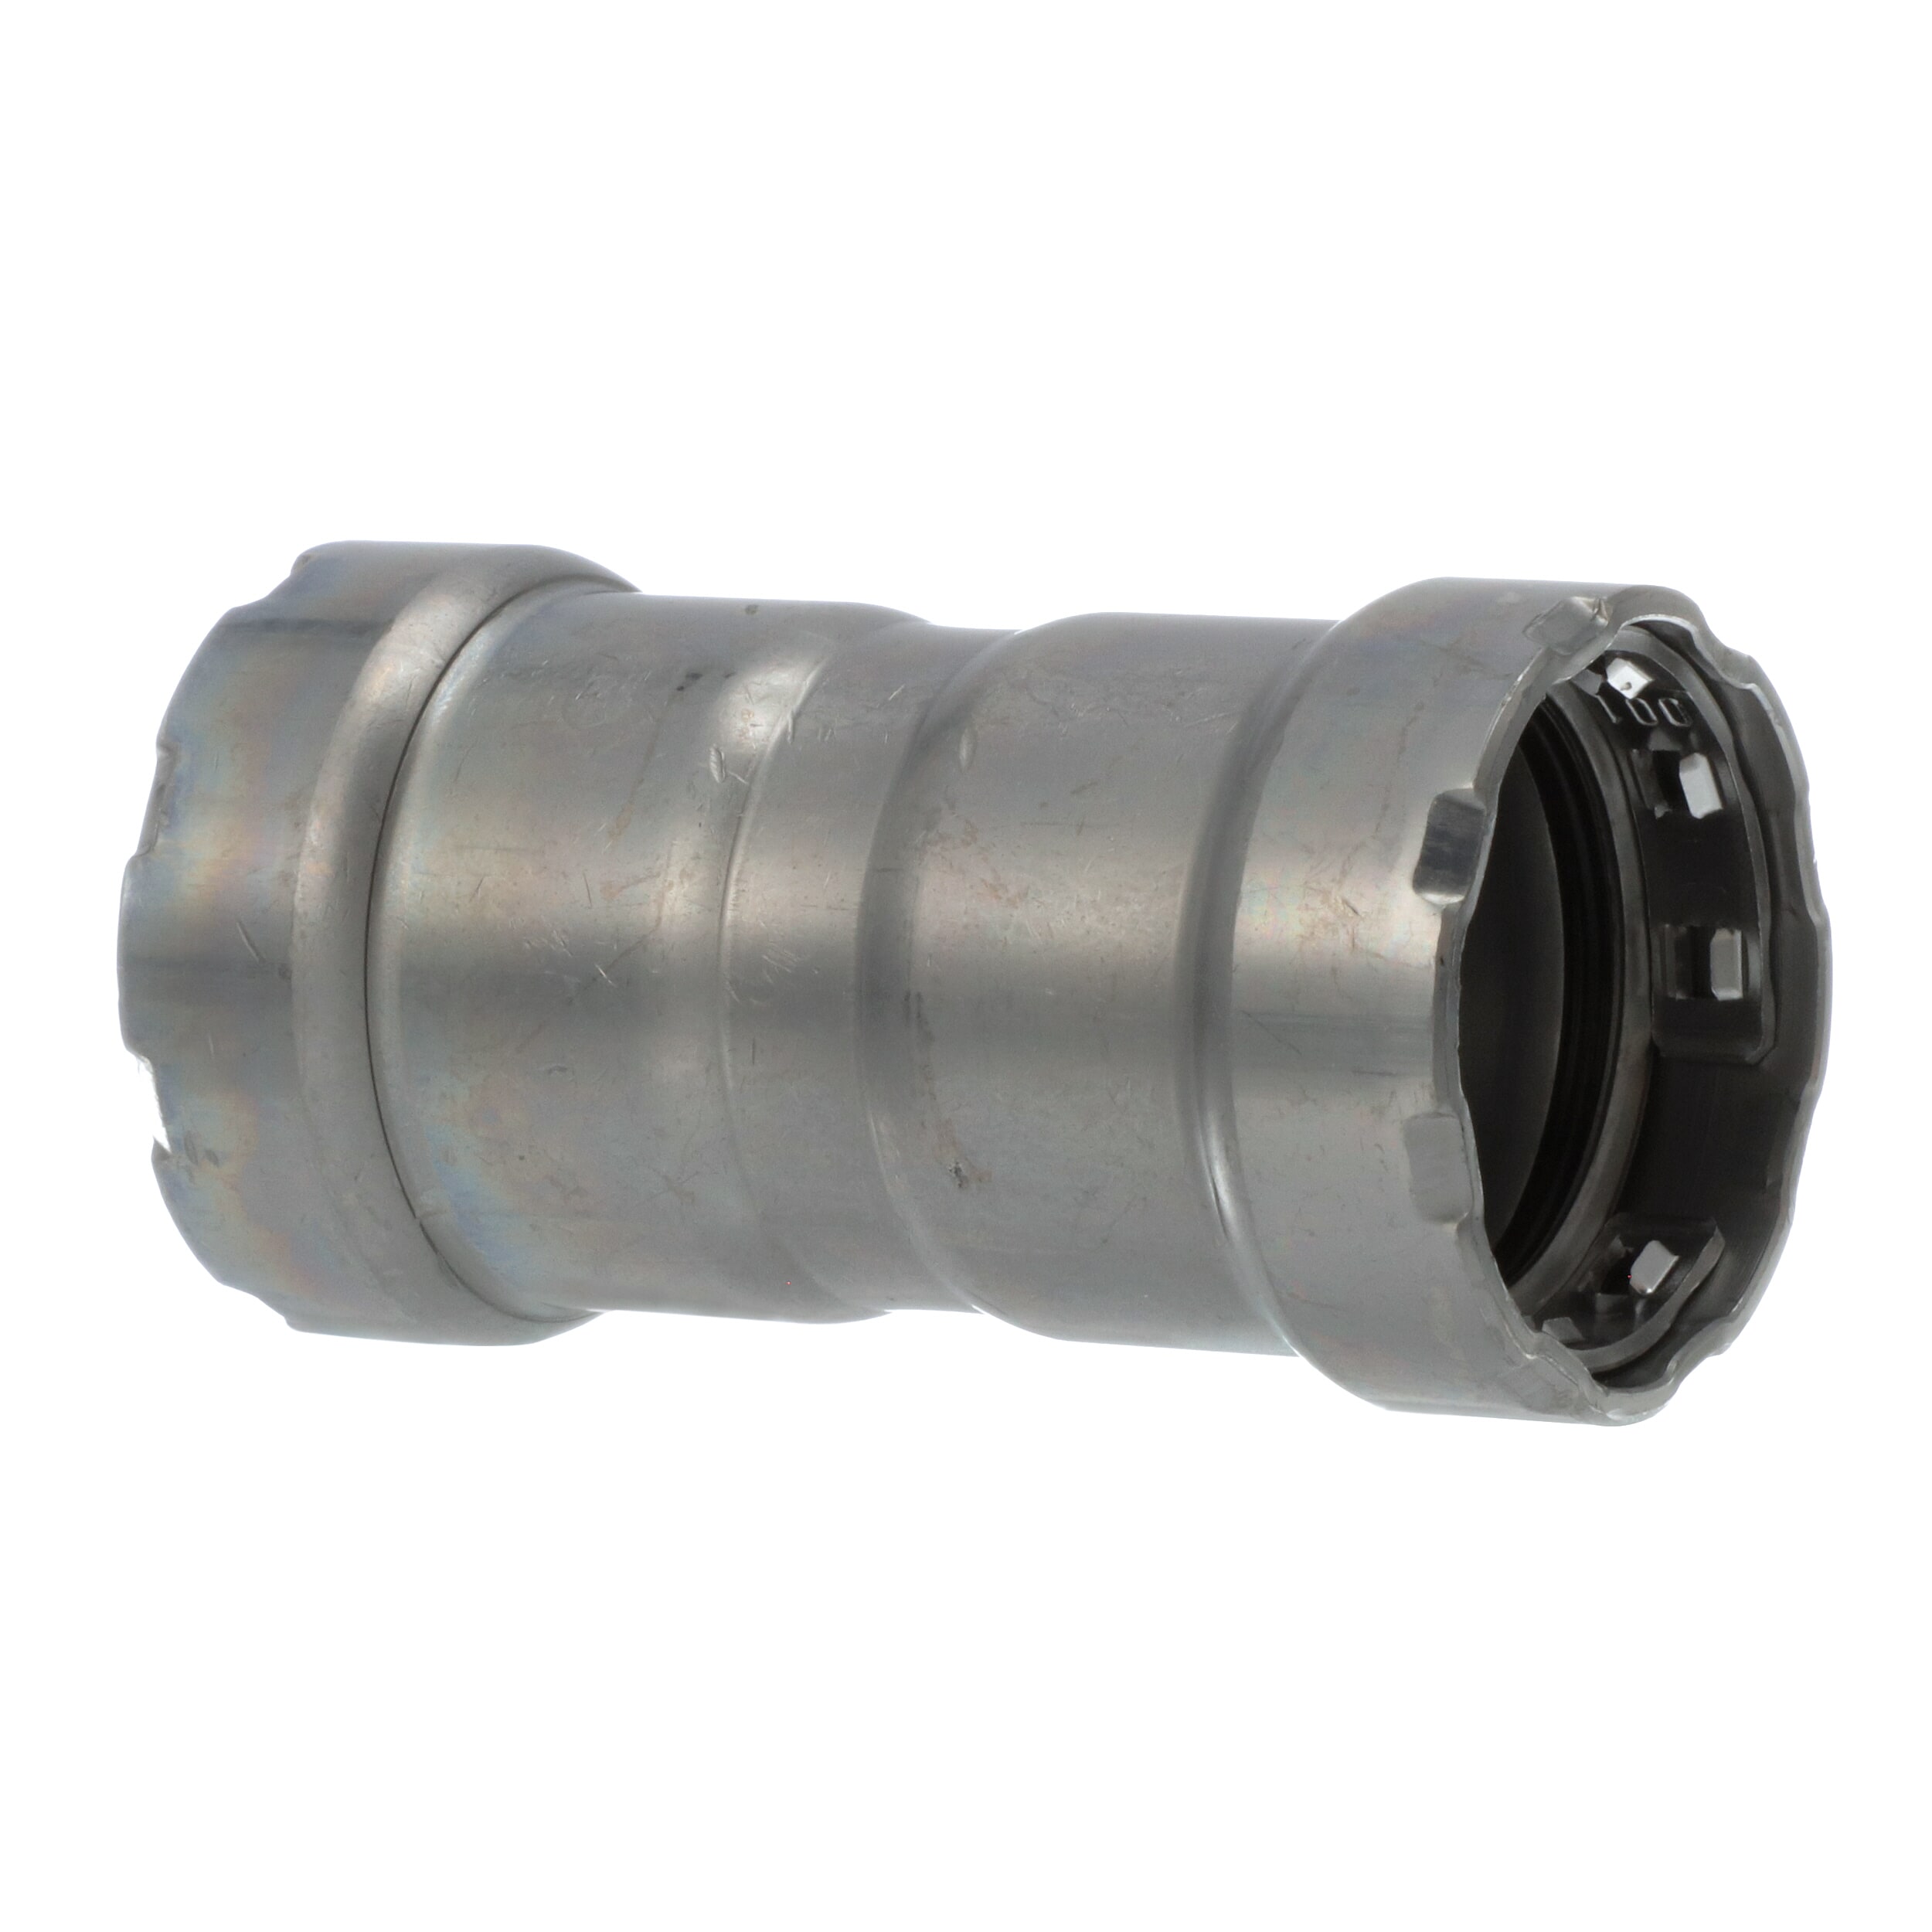 MegaPress® 25010 Pipe Coupling With Stop, 1 in Nominal, Press End Style, Carbon Steel